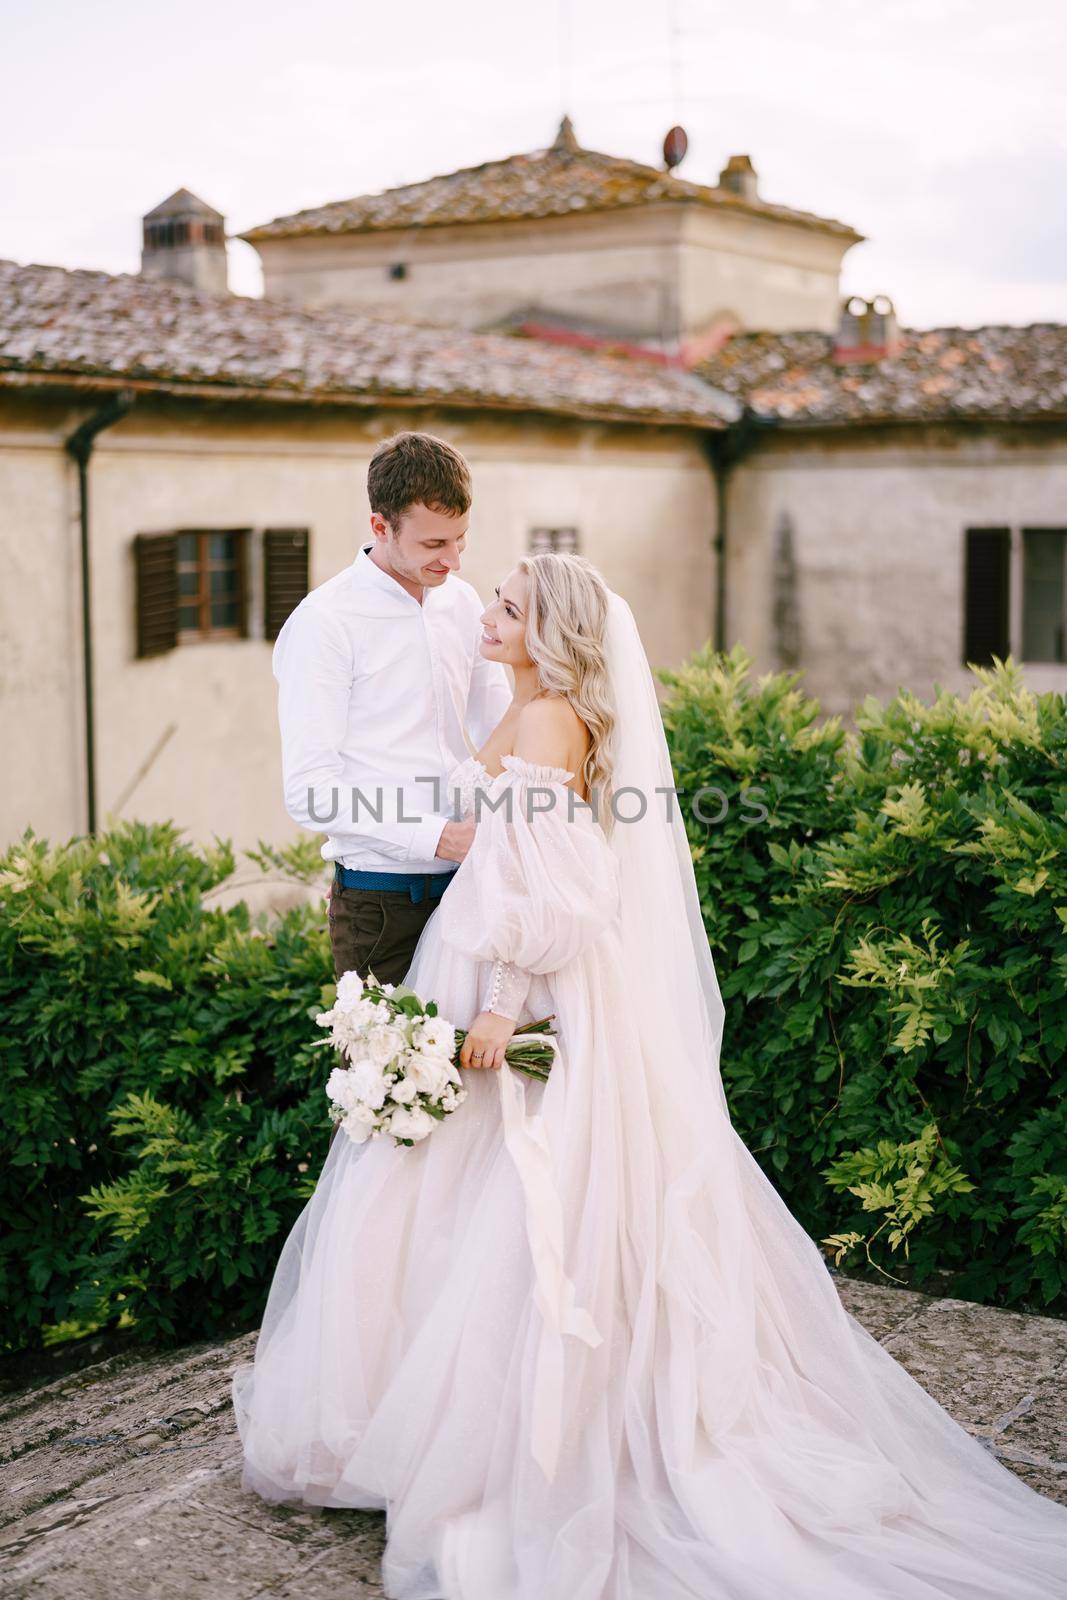 Wedding couple on the roof of an old winery villa. Wedding at an old winery villa in Tuscany, Italy.